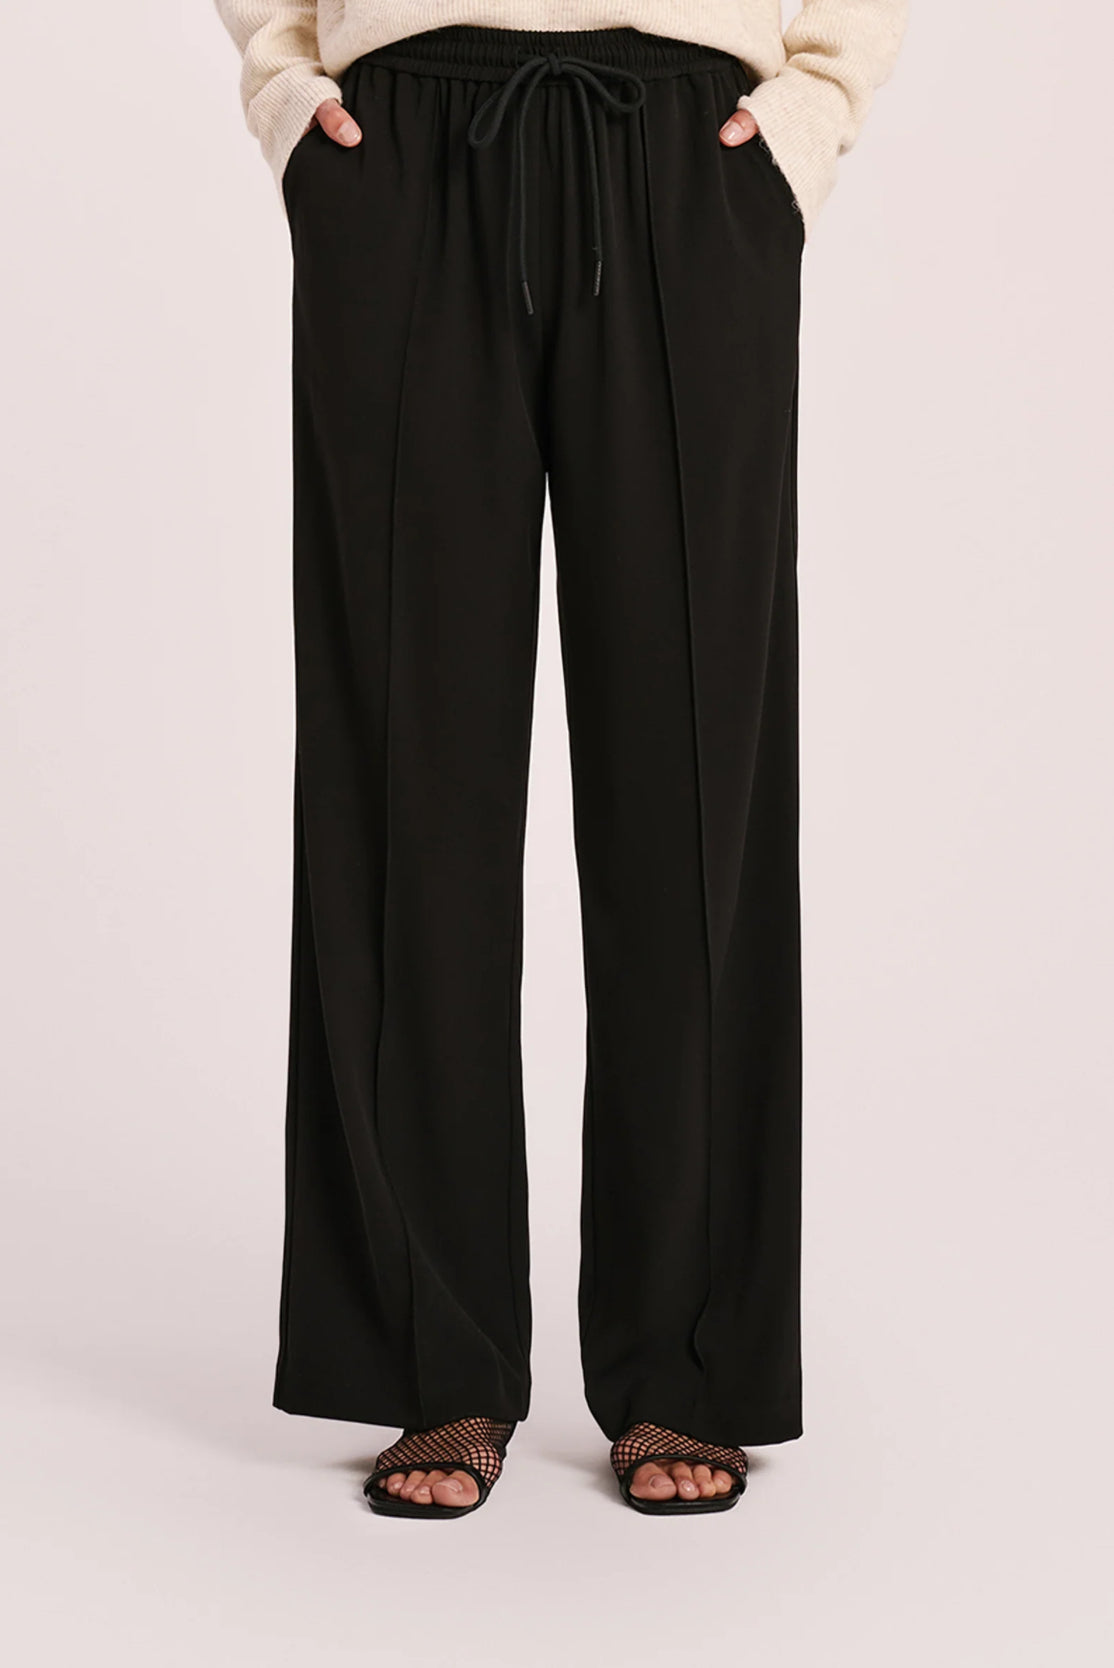 Nude Lucy Quincy Pant in Black